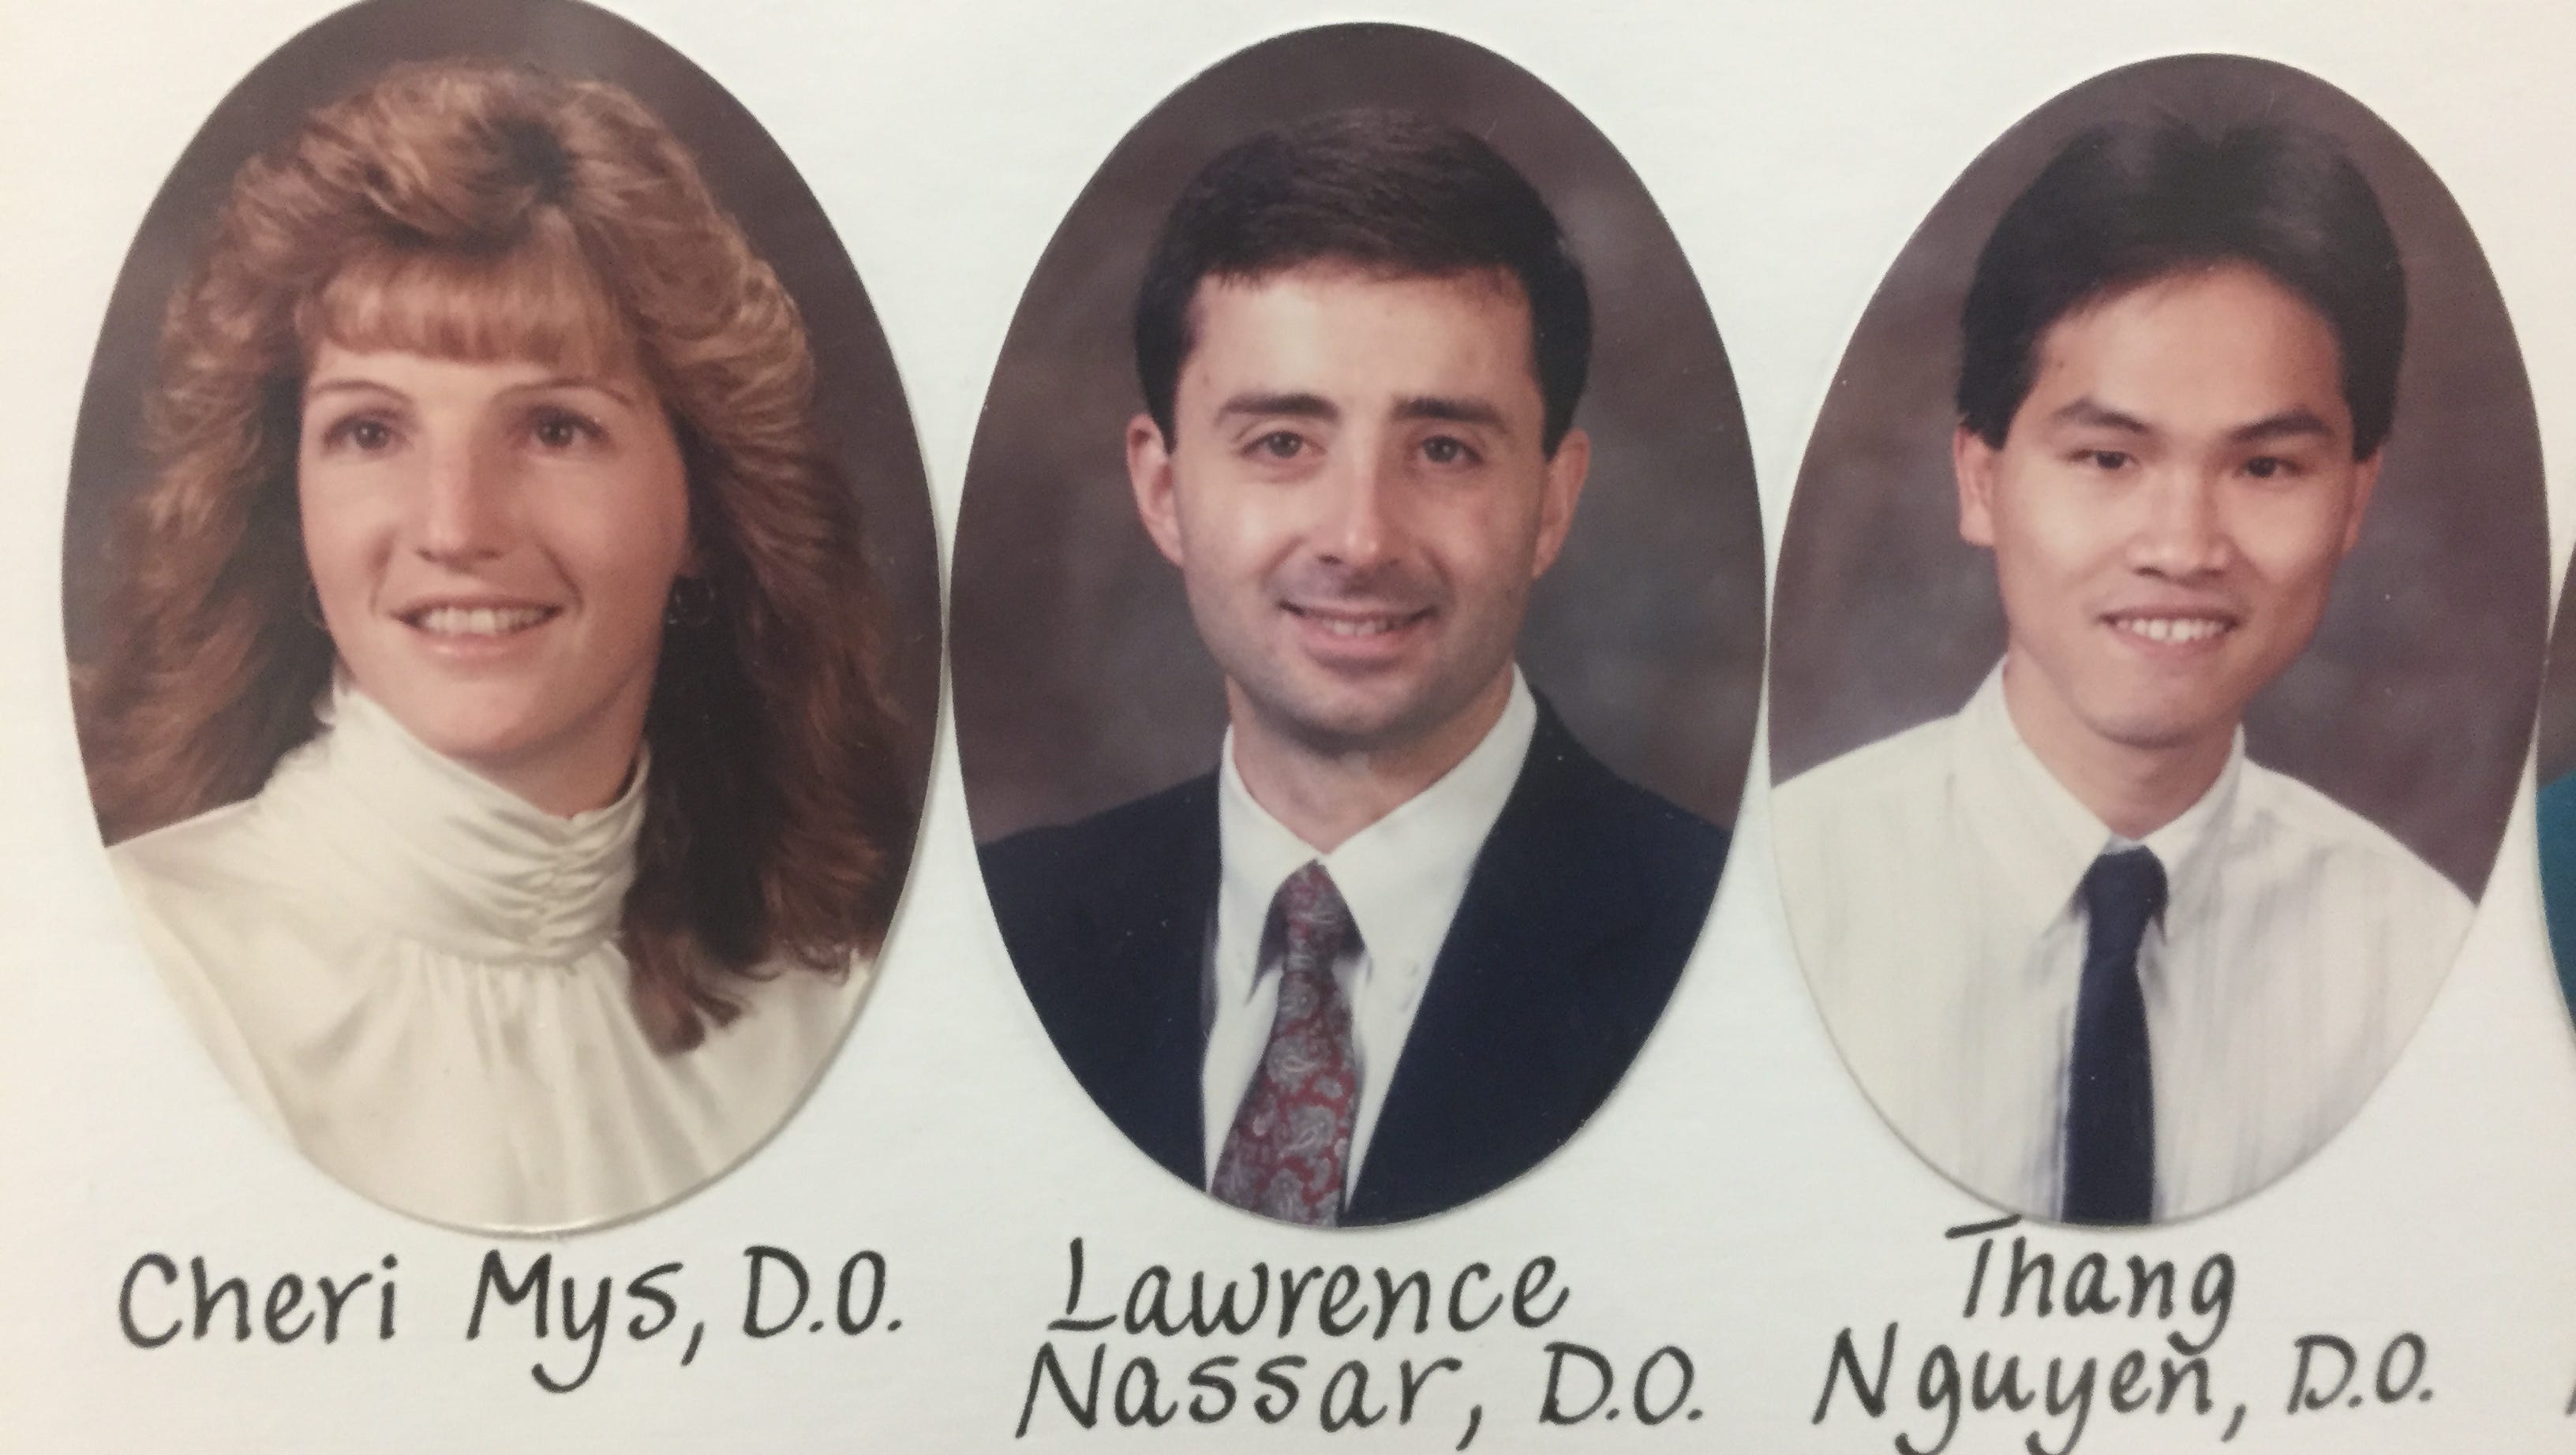 1993: Larry Nassar graduates from Michigan State's College of Osteopathic Medicine. The year before, he assaulted his earliest known victim, a 12- to 14-year-old girl, during a study on manipulation treatments for his medical degree, according to a federal lawsuit against him.